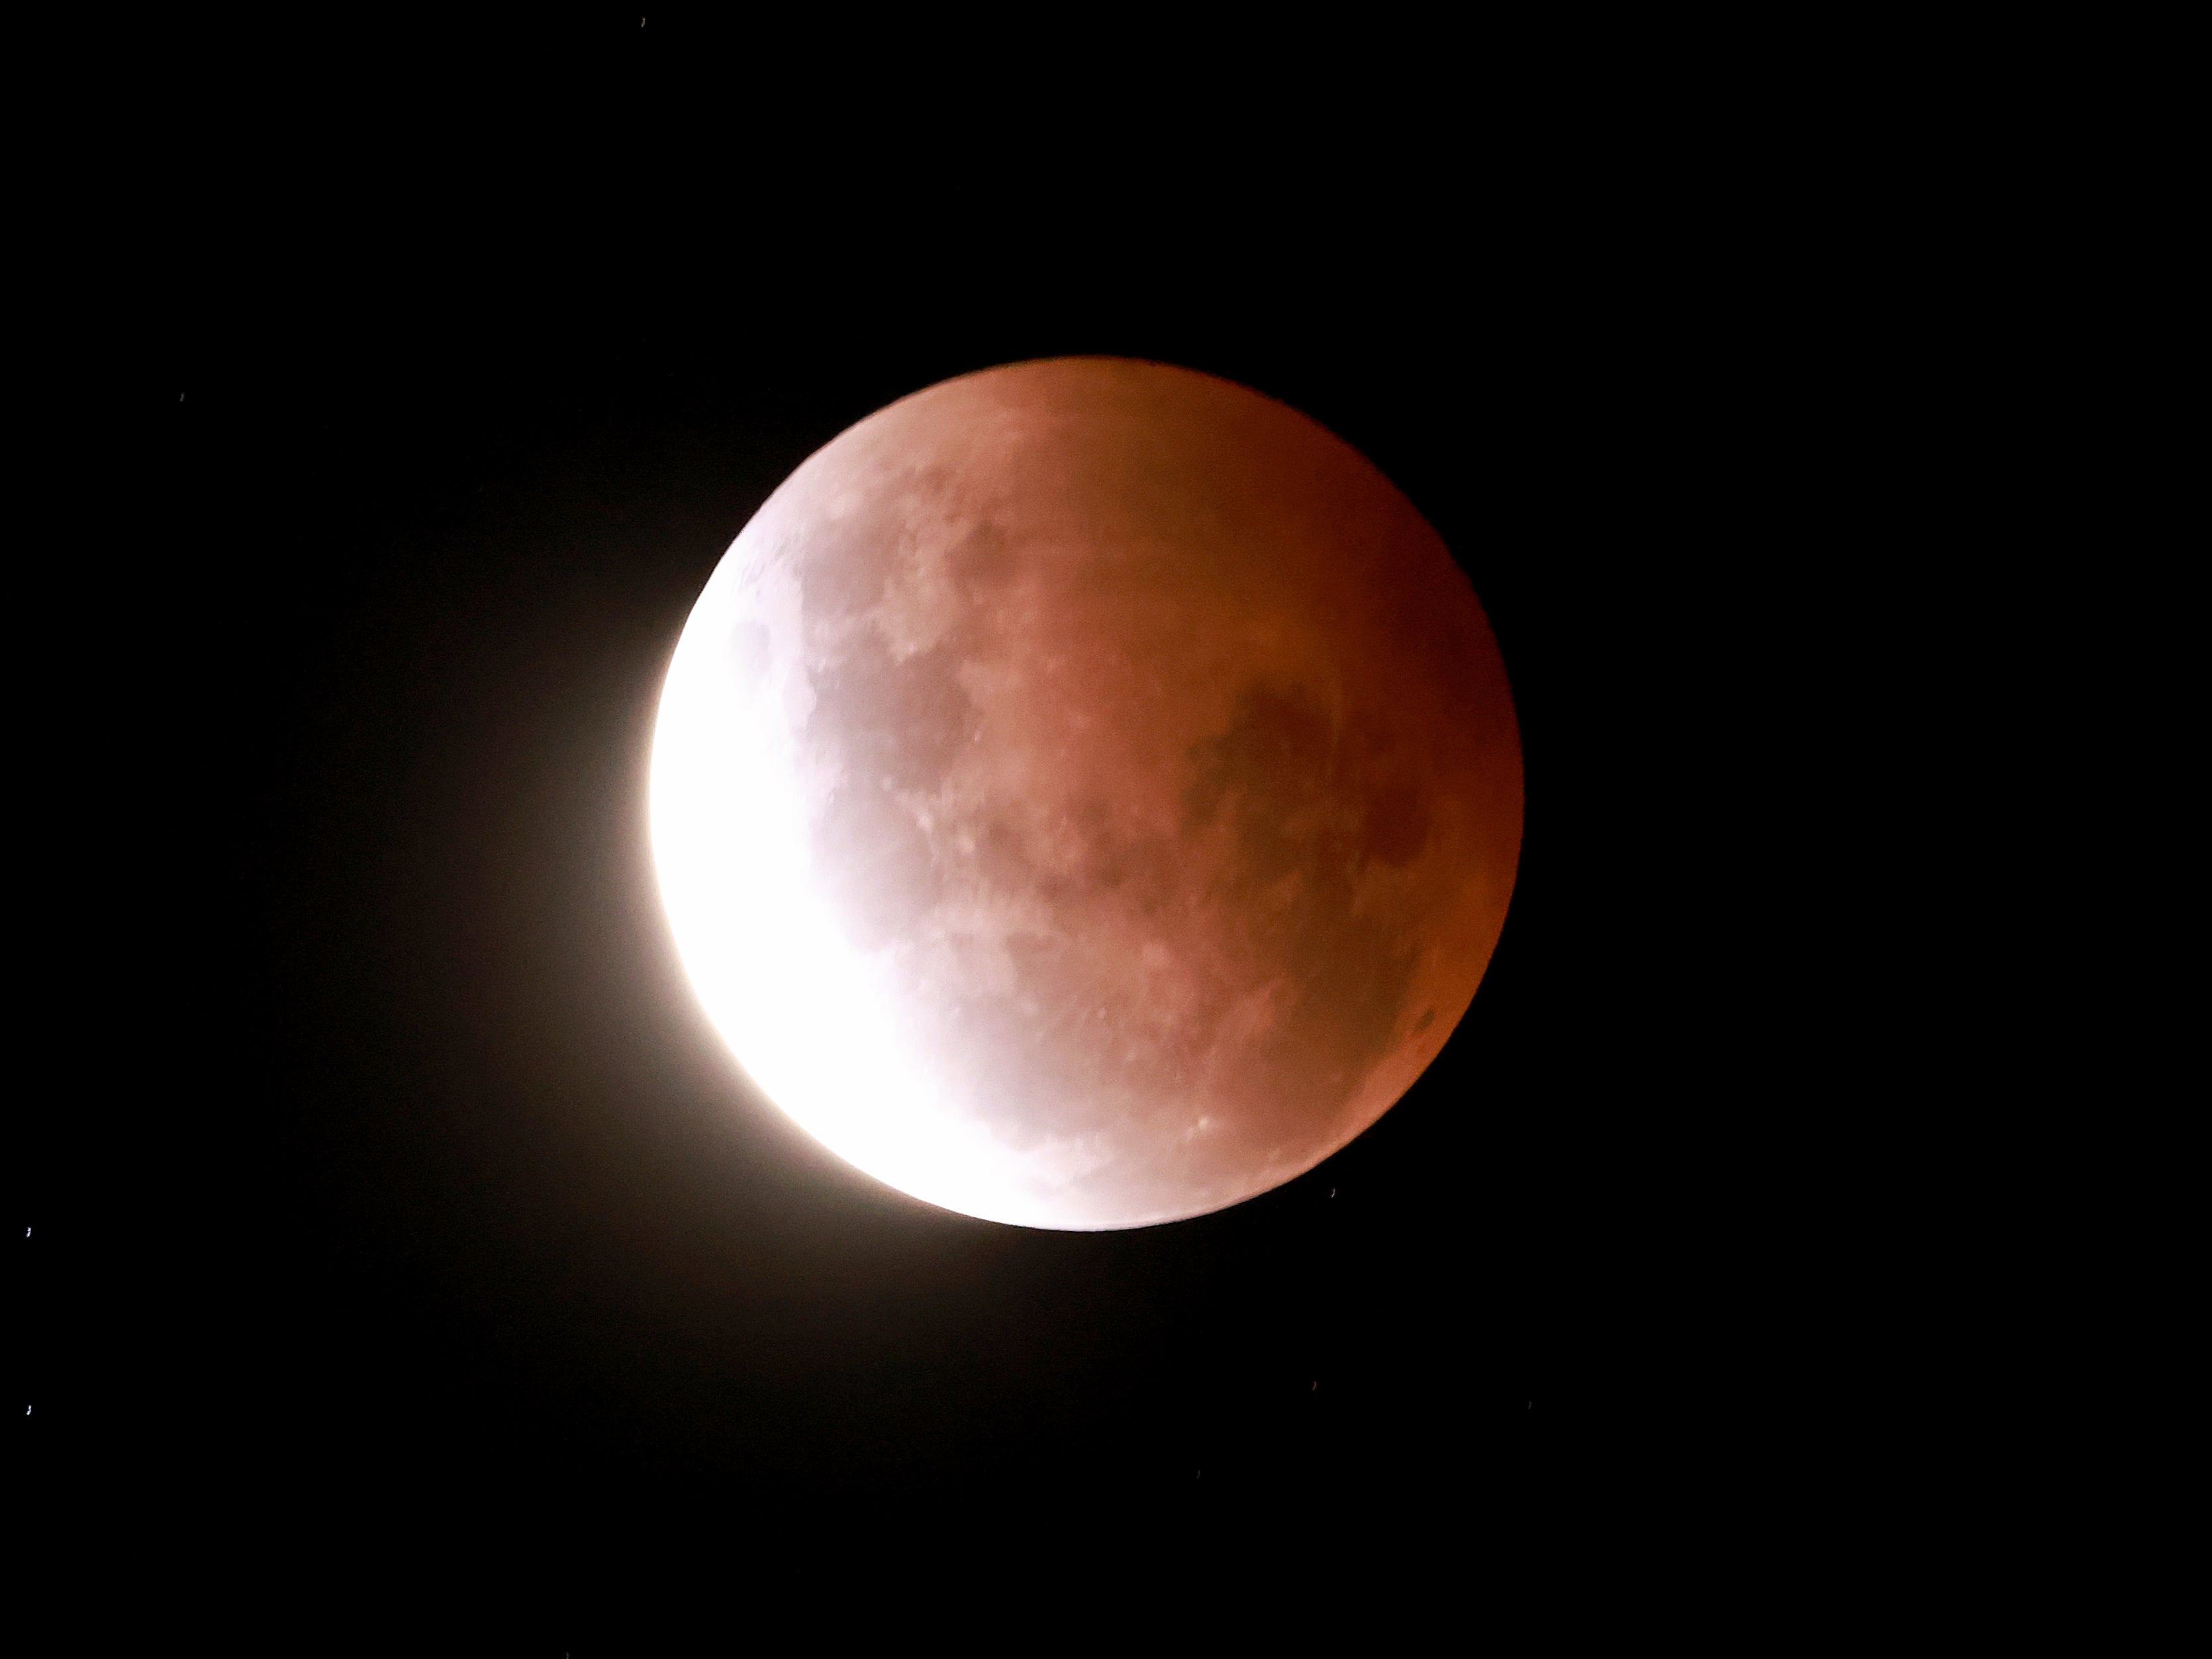 The partial eclipse of the moon begins on Wednesday 26 May 2021 in Auckland, New Zealand